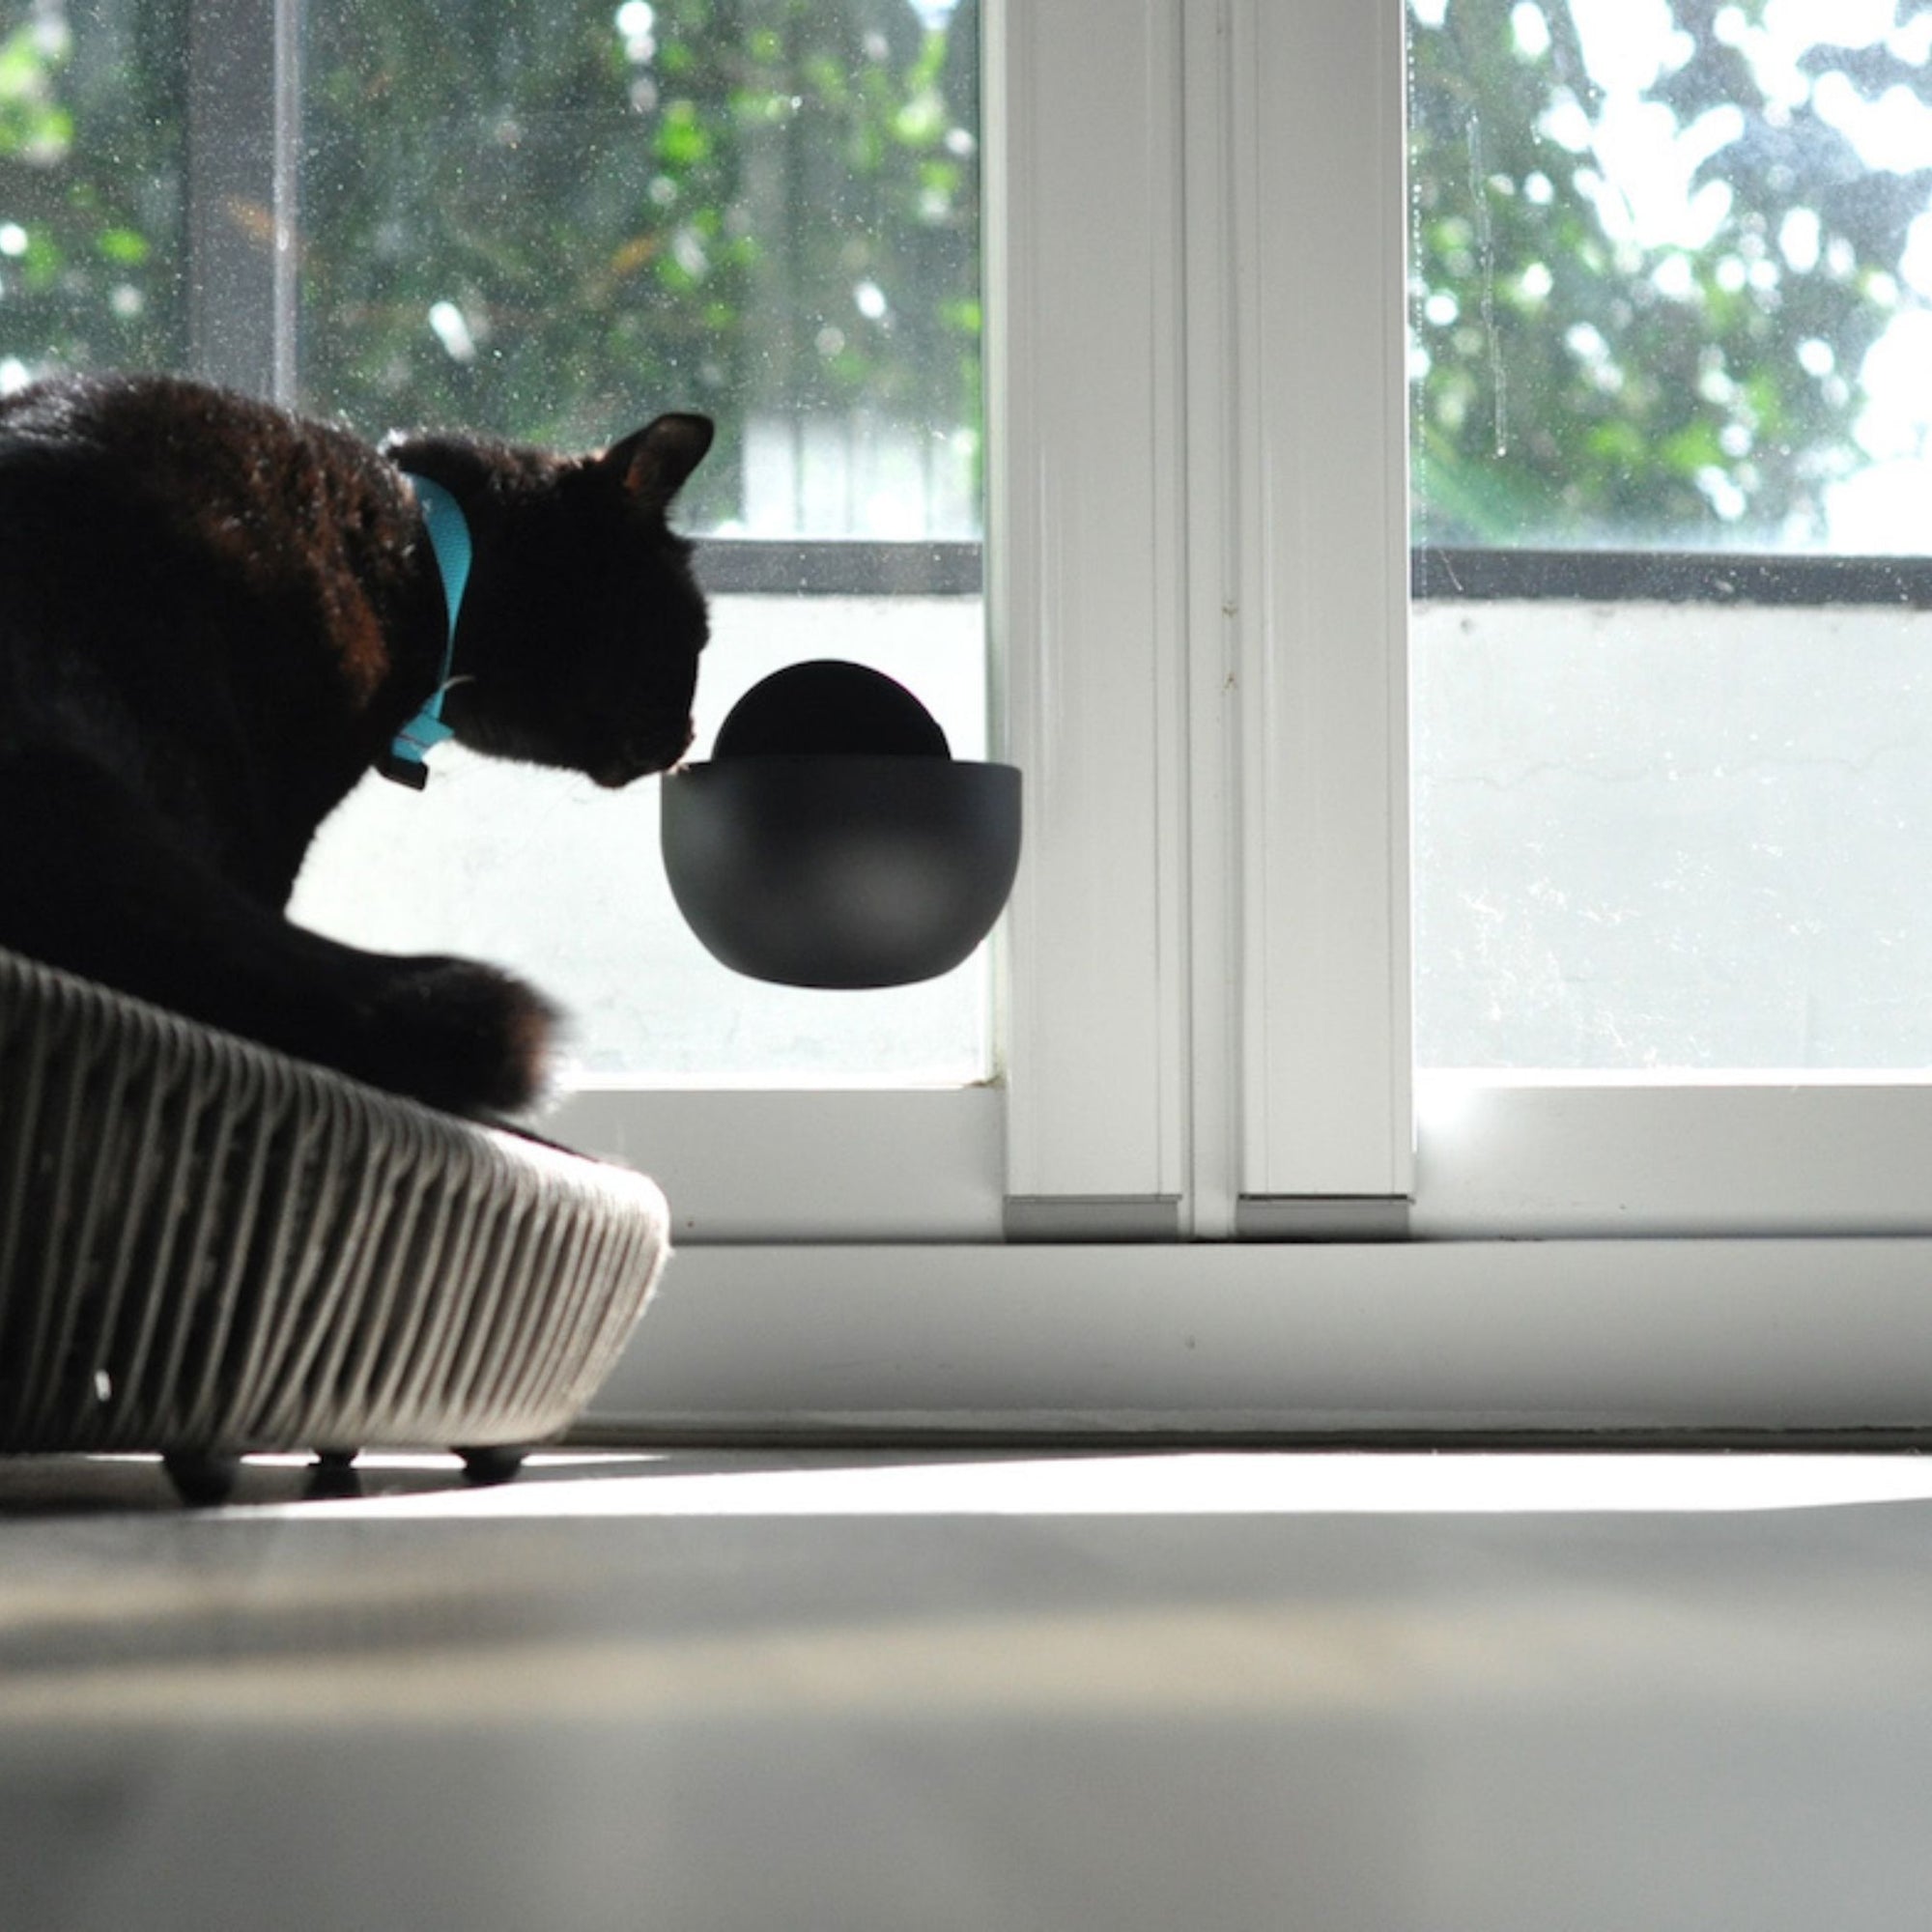 Your dog or cat will love the self-magnetic portable mobile pet bowl!